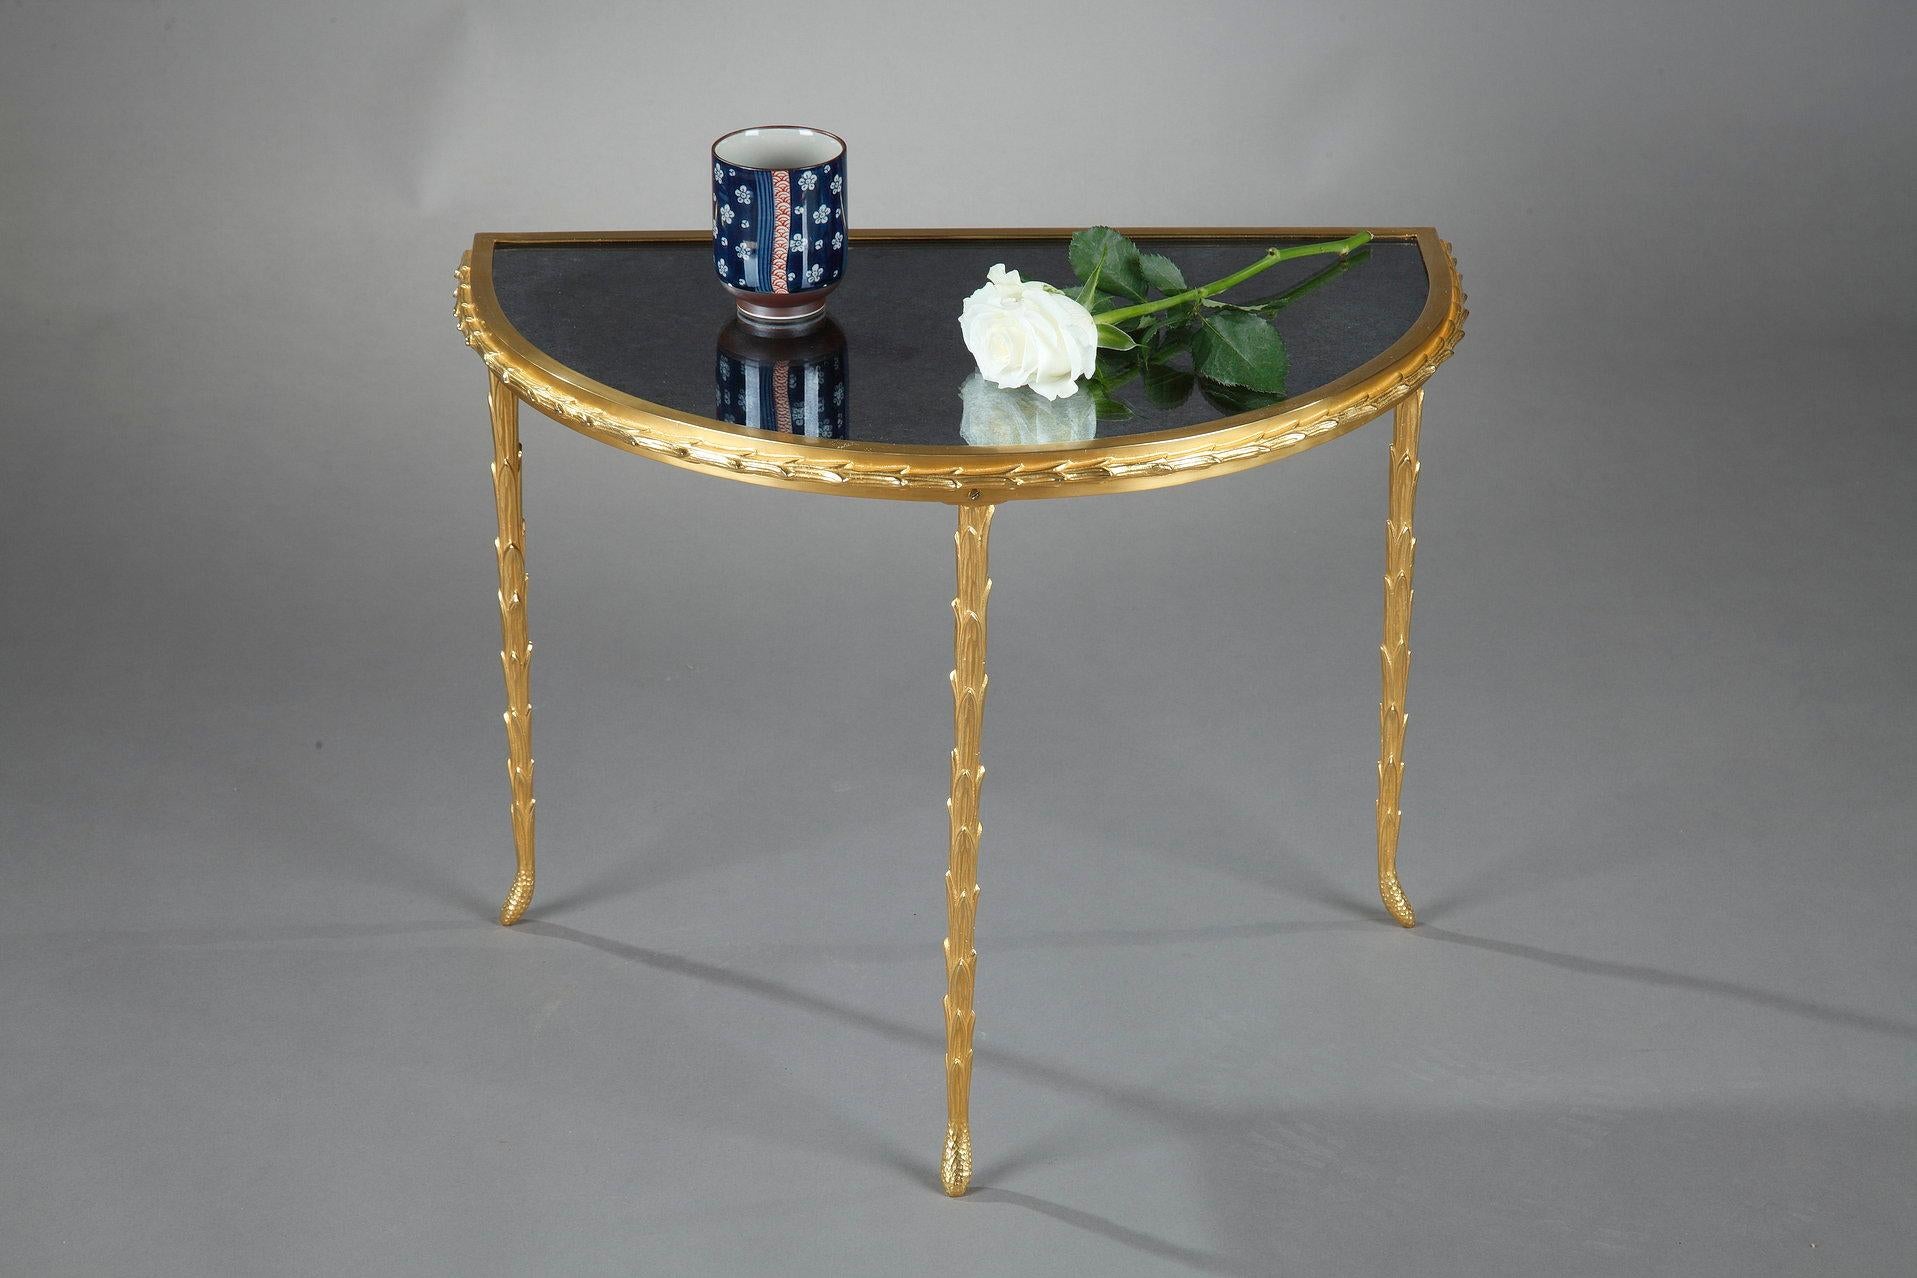 Small console of the house Baguès in semicircle with a gilt bronze base. The tray is made of a mirror with an aged black background. The belt and the feet are decorated in a pattern of foliage. Its dates from the 1950s. 

The House of Baguès is a